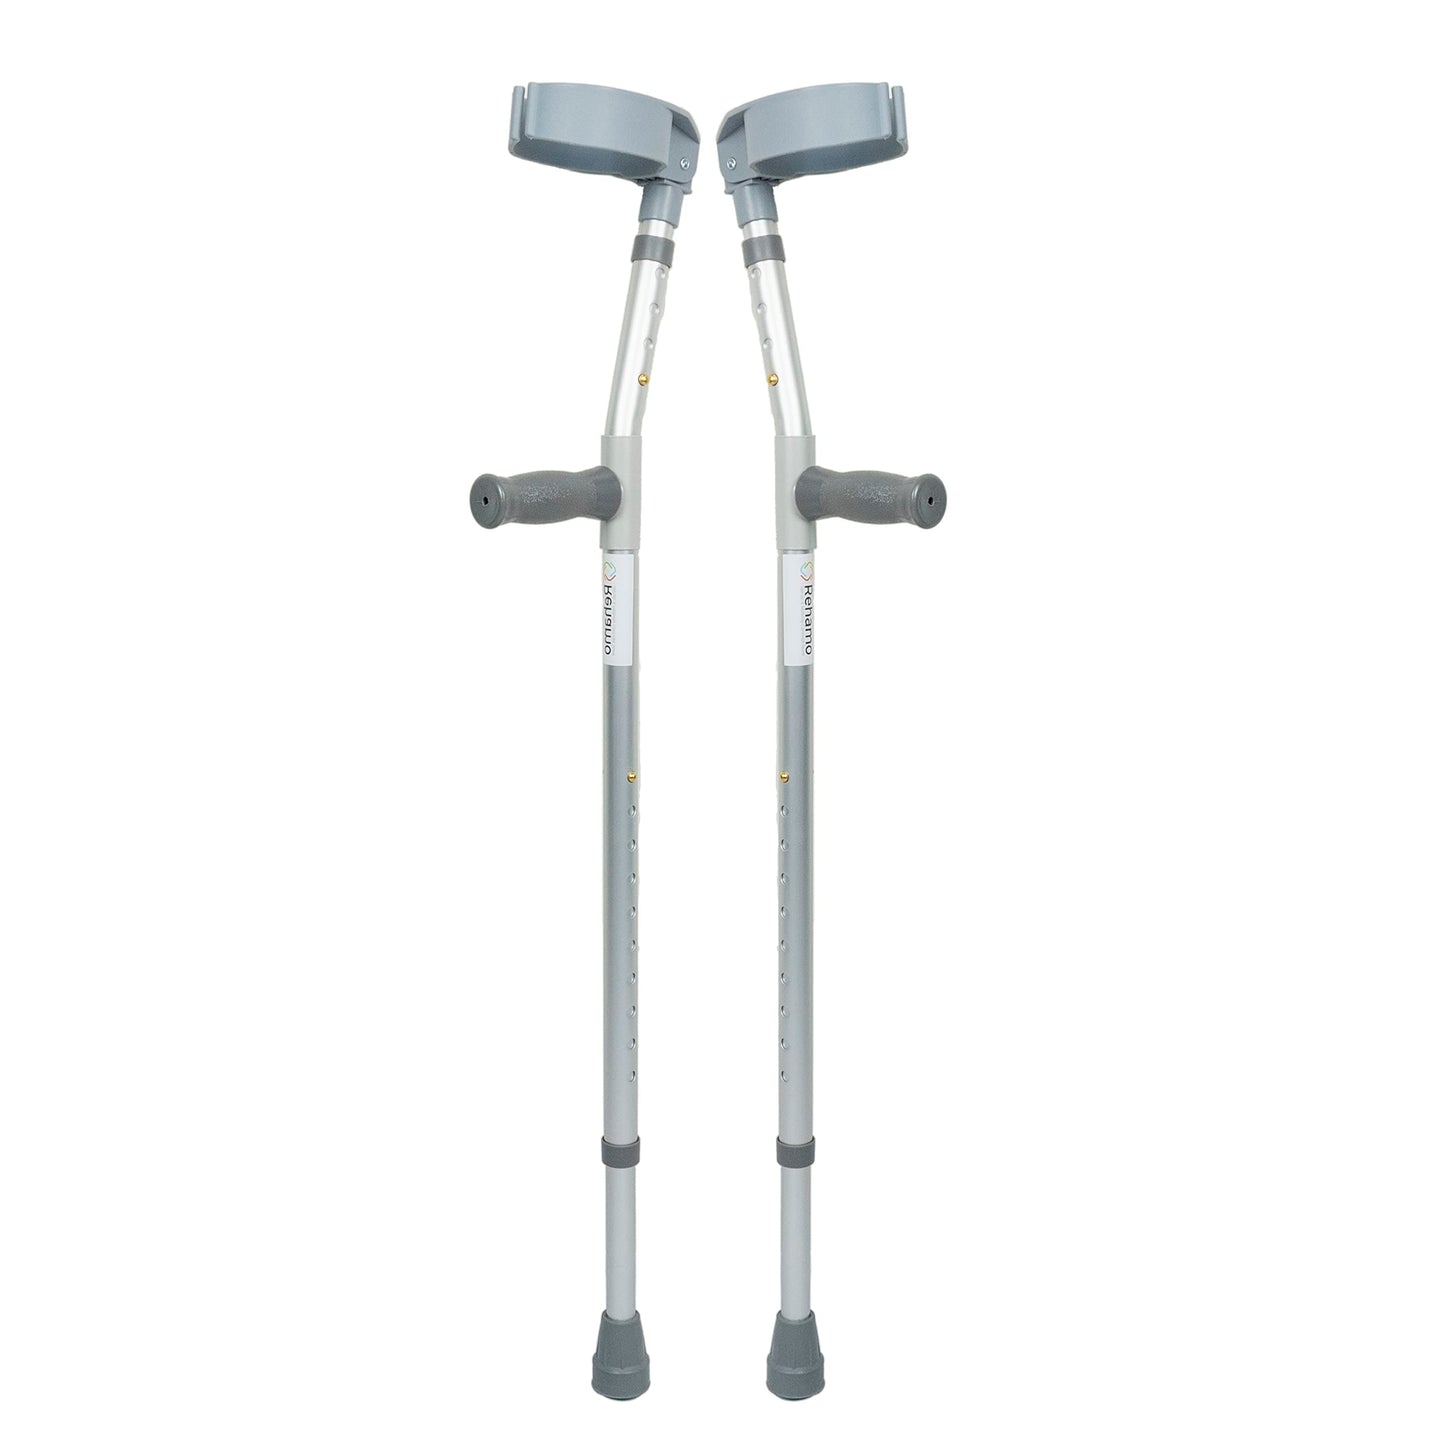 Rehamo Lightweight Walking Forearm Crutches with Height Adjustment - Size M - Height 5.2-5.10 Ft | Folding Crutches for Elderly, Disabled & Old People | Comfortable Crutches with Arm Support